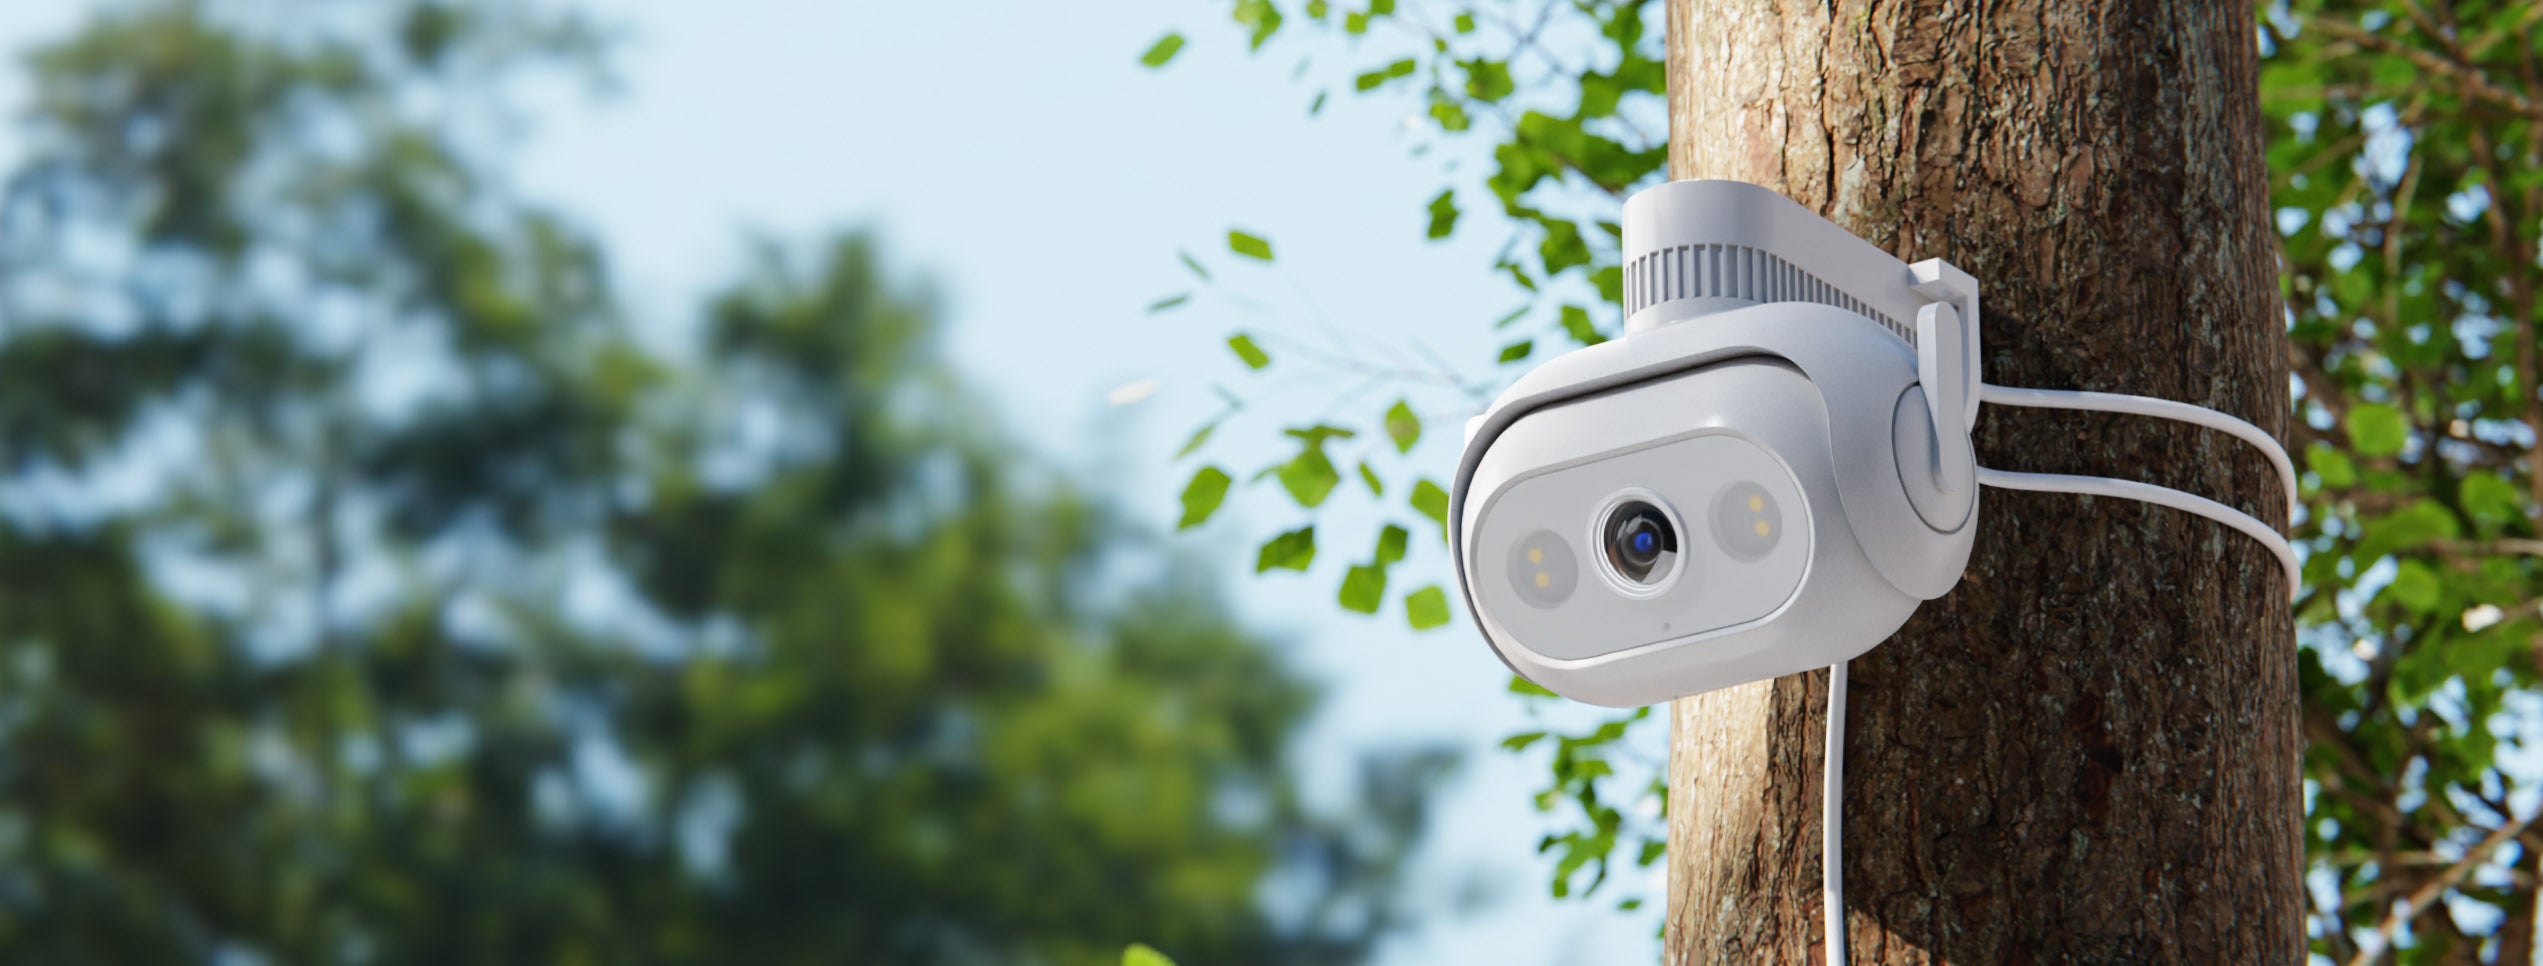 imilab-ec5-white-camera-mounted-on-tree-log-with-blue-sky-in-the-background